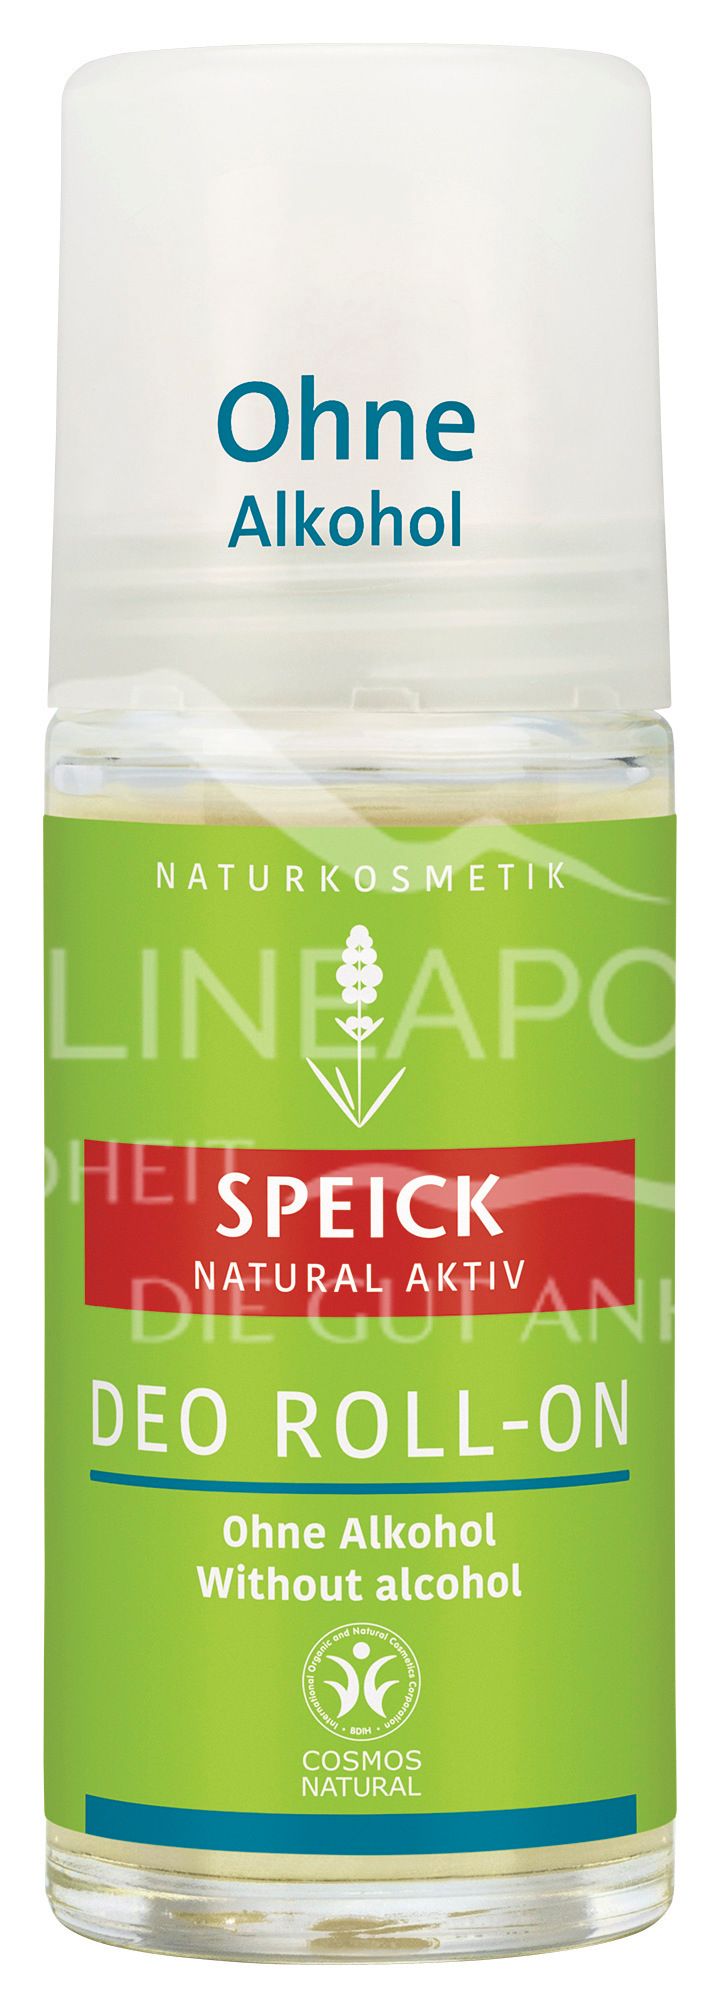 Speick Natural Aktiv Deo Roll-on - Ohne Alkohol